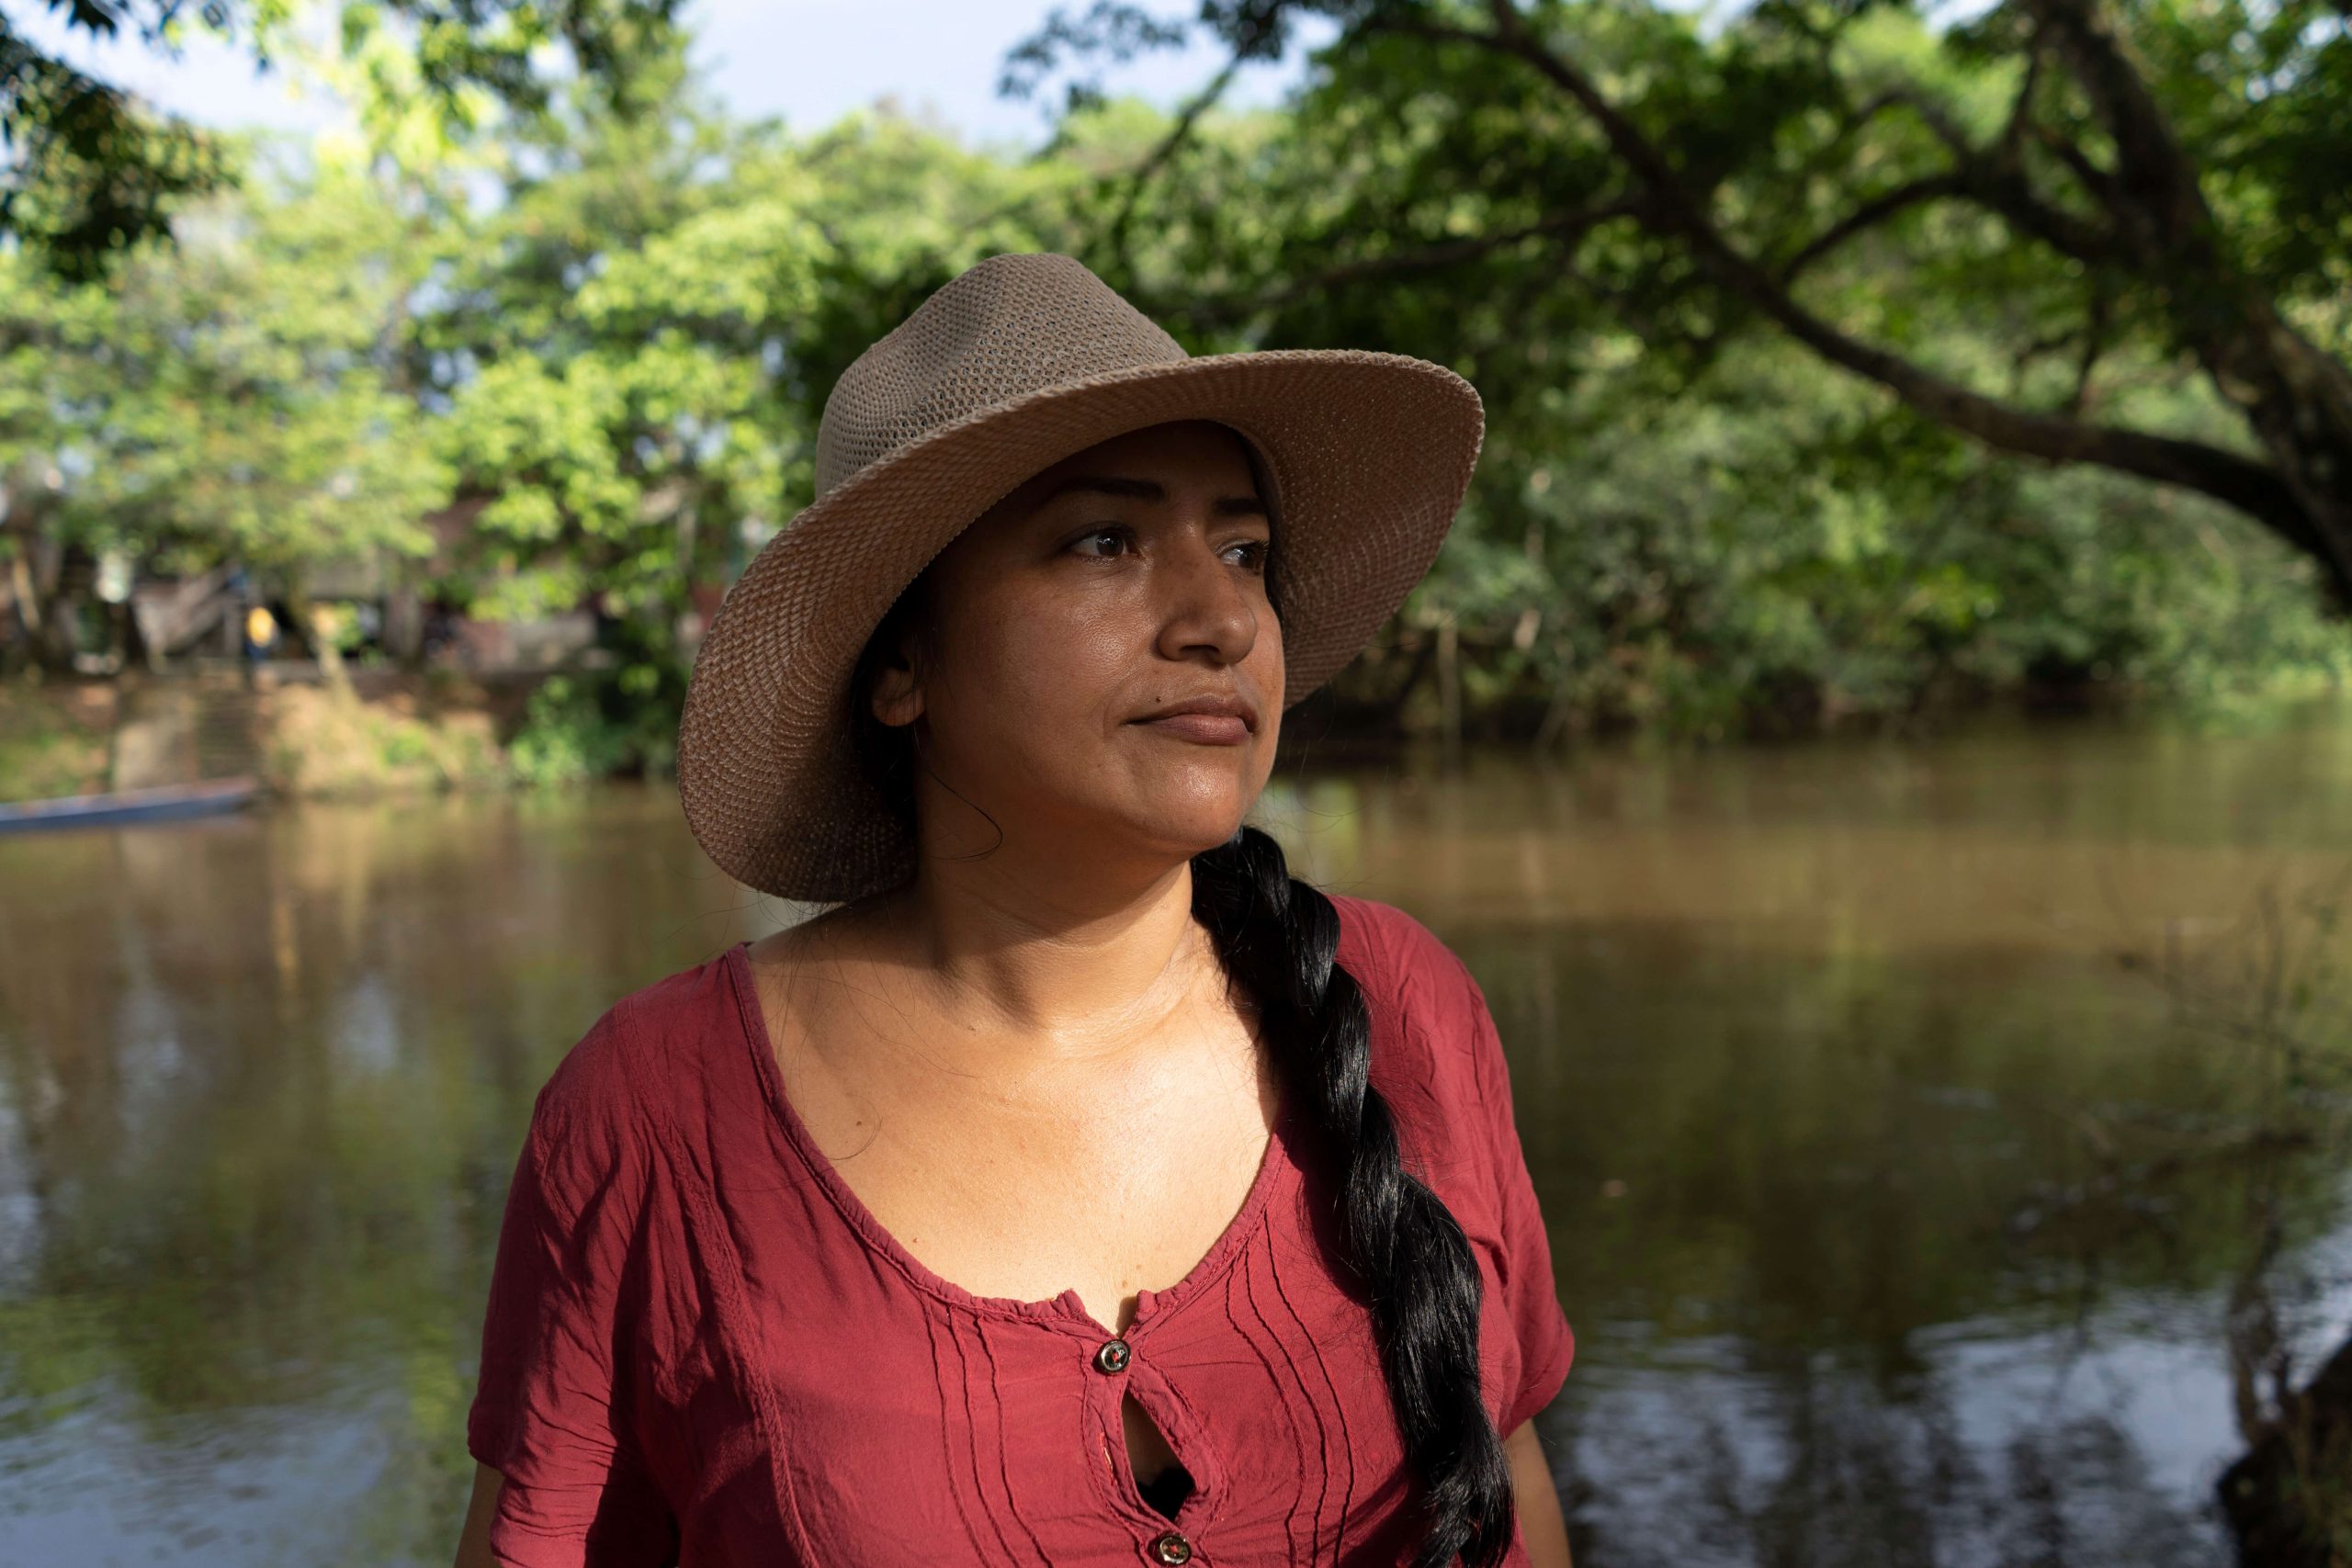 Tania Hernández Tellez stands up for climate justice in her home of southern Colombia. Photo: Andrés Cardona/Oxfam